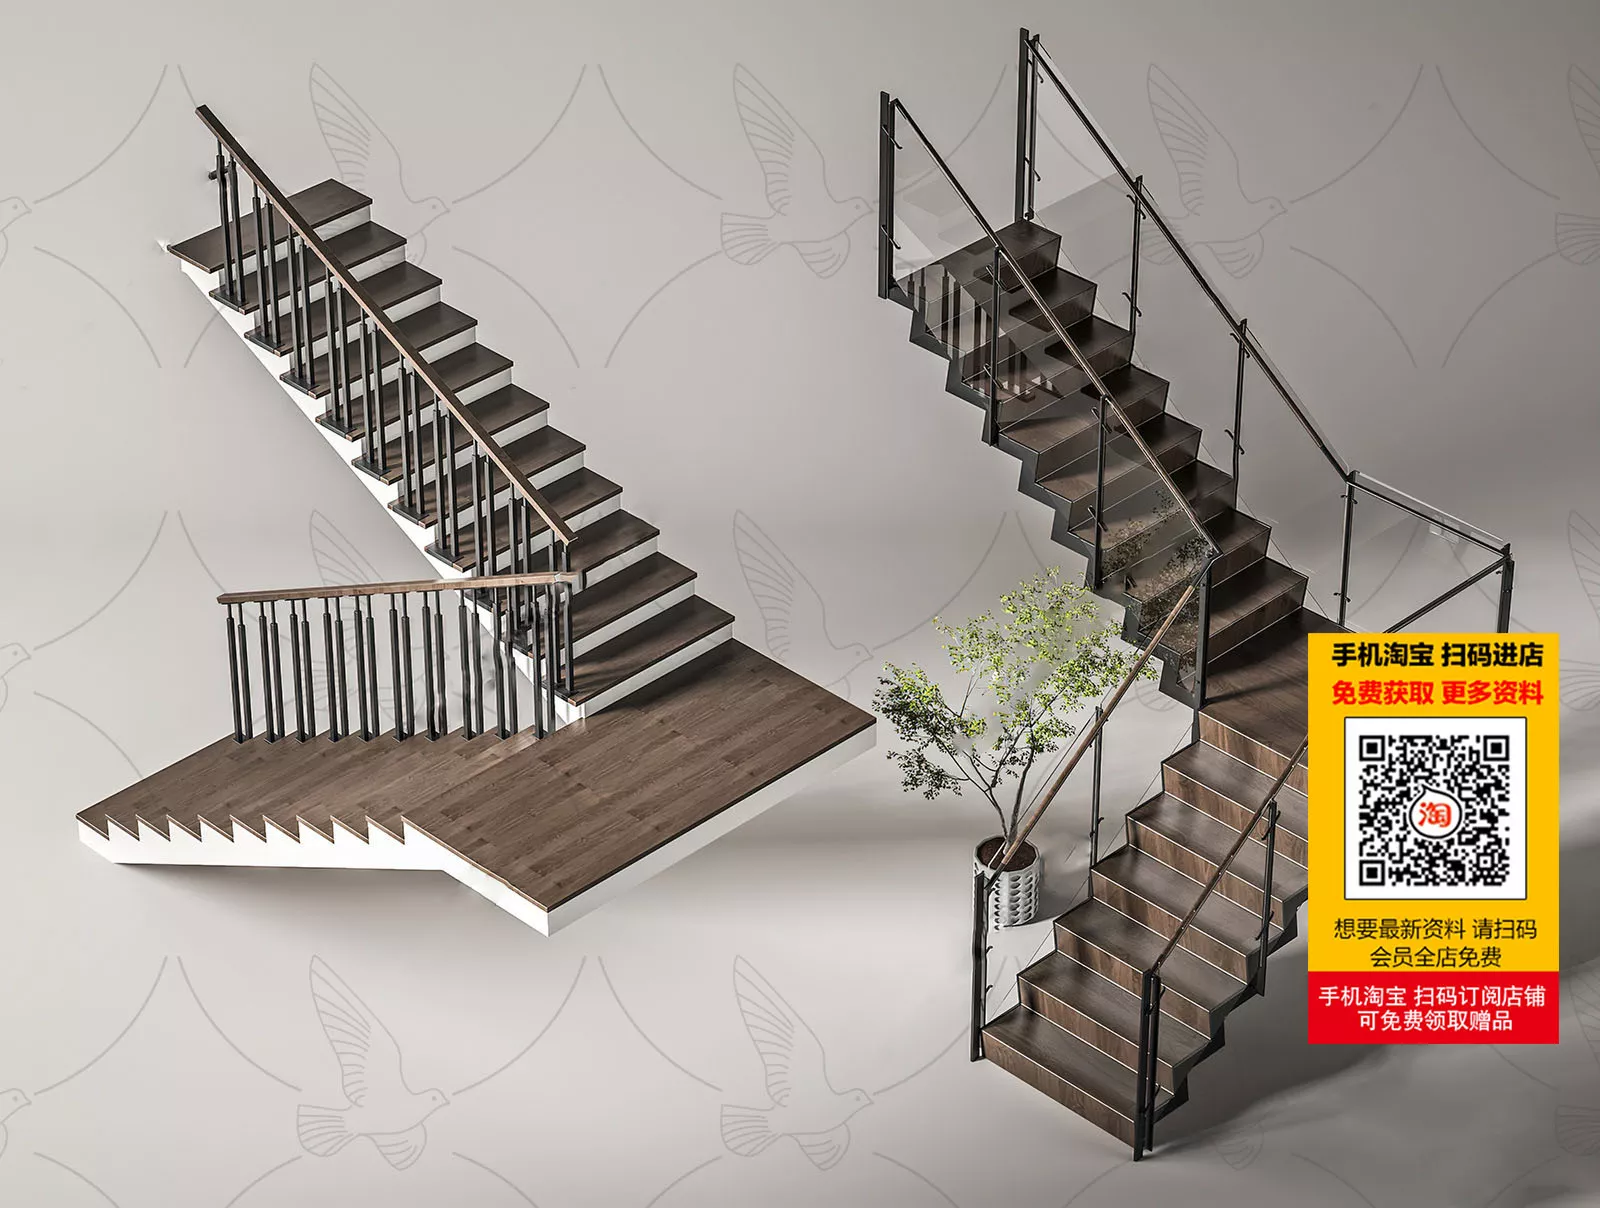 MODERN STAIRS - SKETCHUP 3D MODEL - VRAY OR ENSCAPE - ID14330